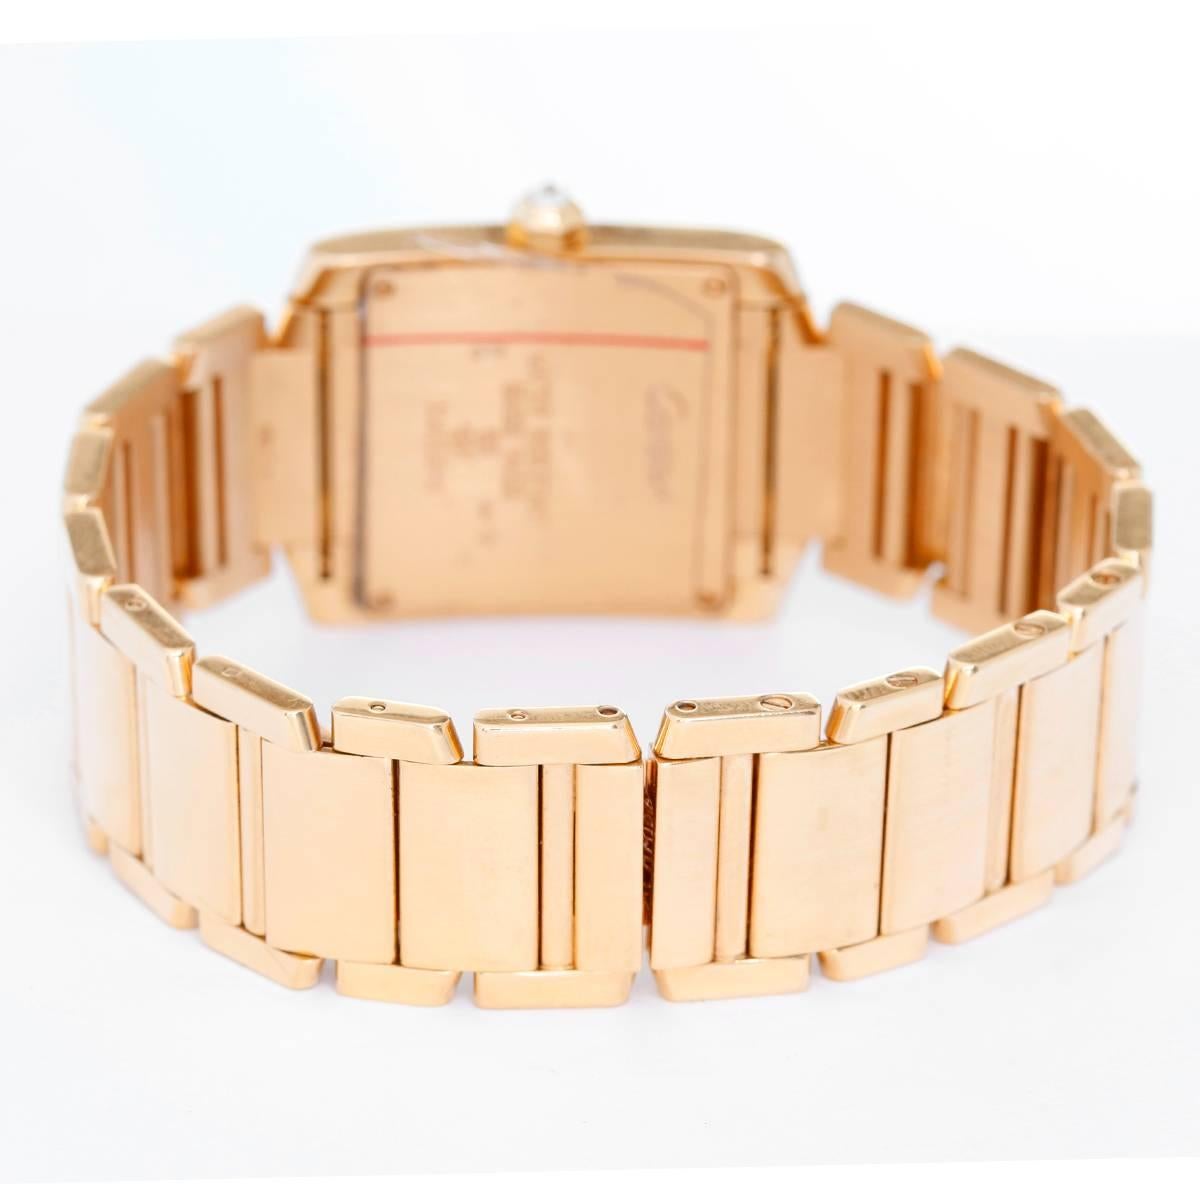 Cartier Tank Francaise Midsize 18k Yellow Gold Watch WE1017R8 - Quartz. 18k yellow gold case with 2 rows of diamonds on either side (25mm x 30mm). Ivory colored dial with black Roman numerals. 18k yellow gold Cartier bracelet with deployant clasp.